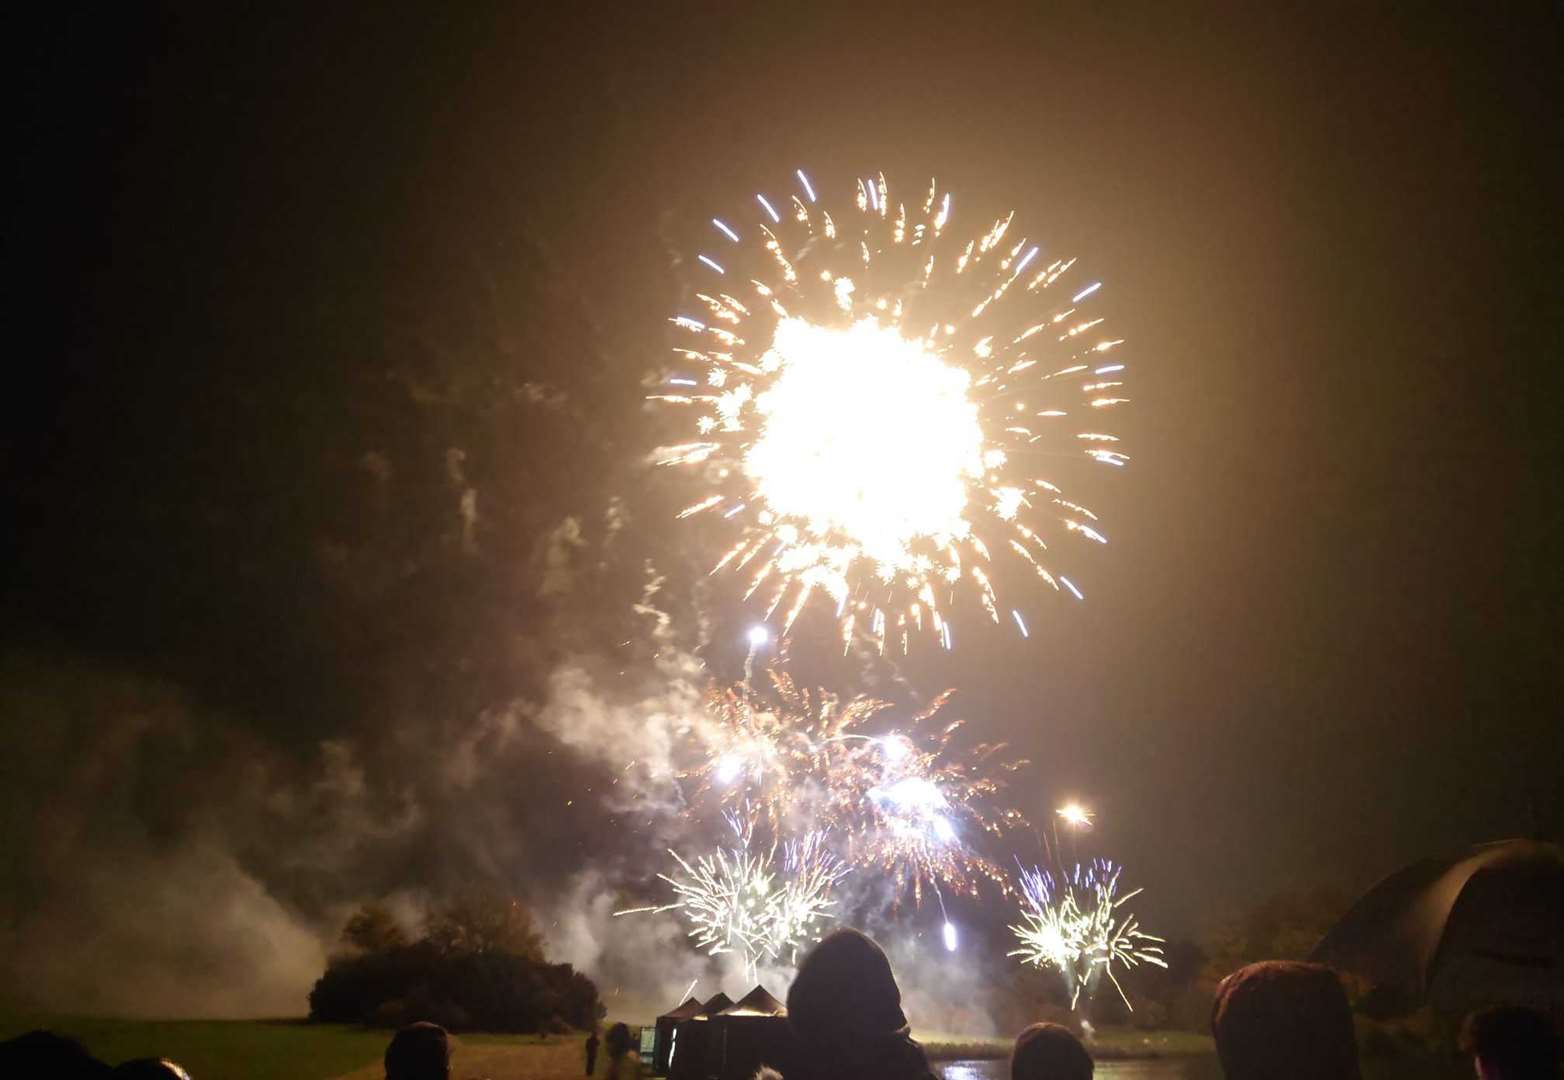 The 2023 fireworks display at Leeds Castle took place yesterday evening